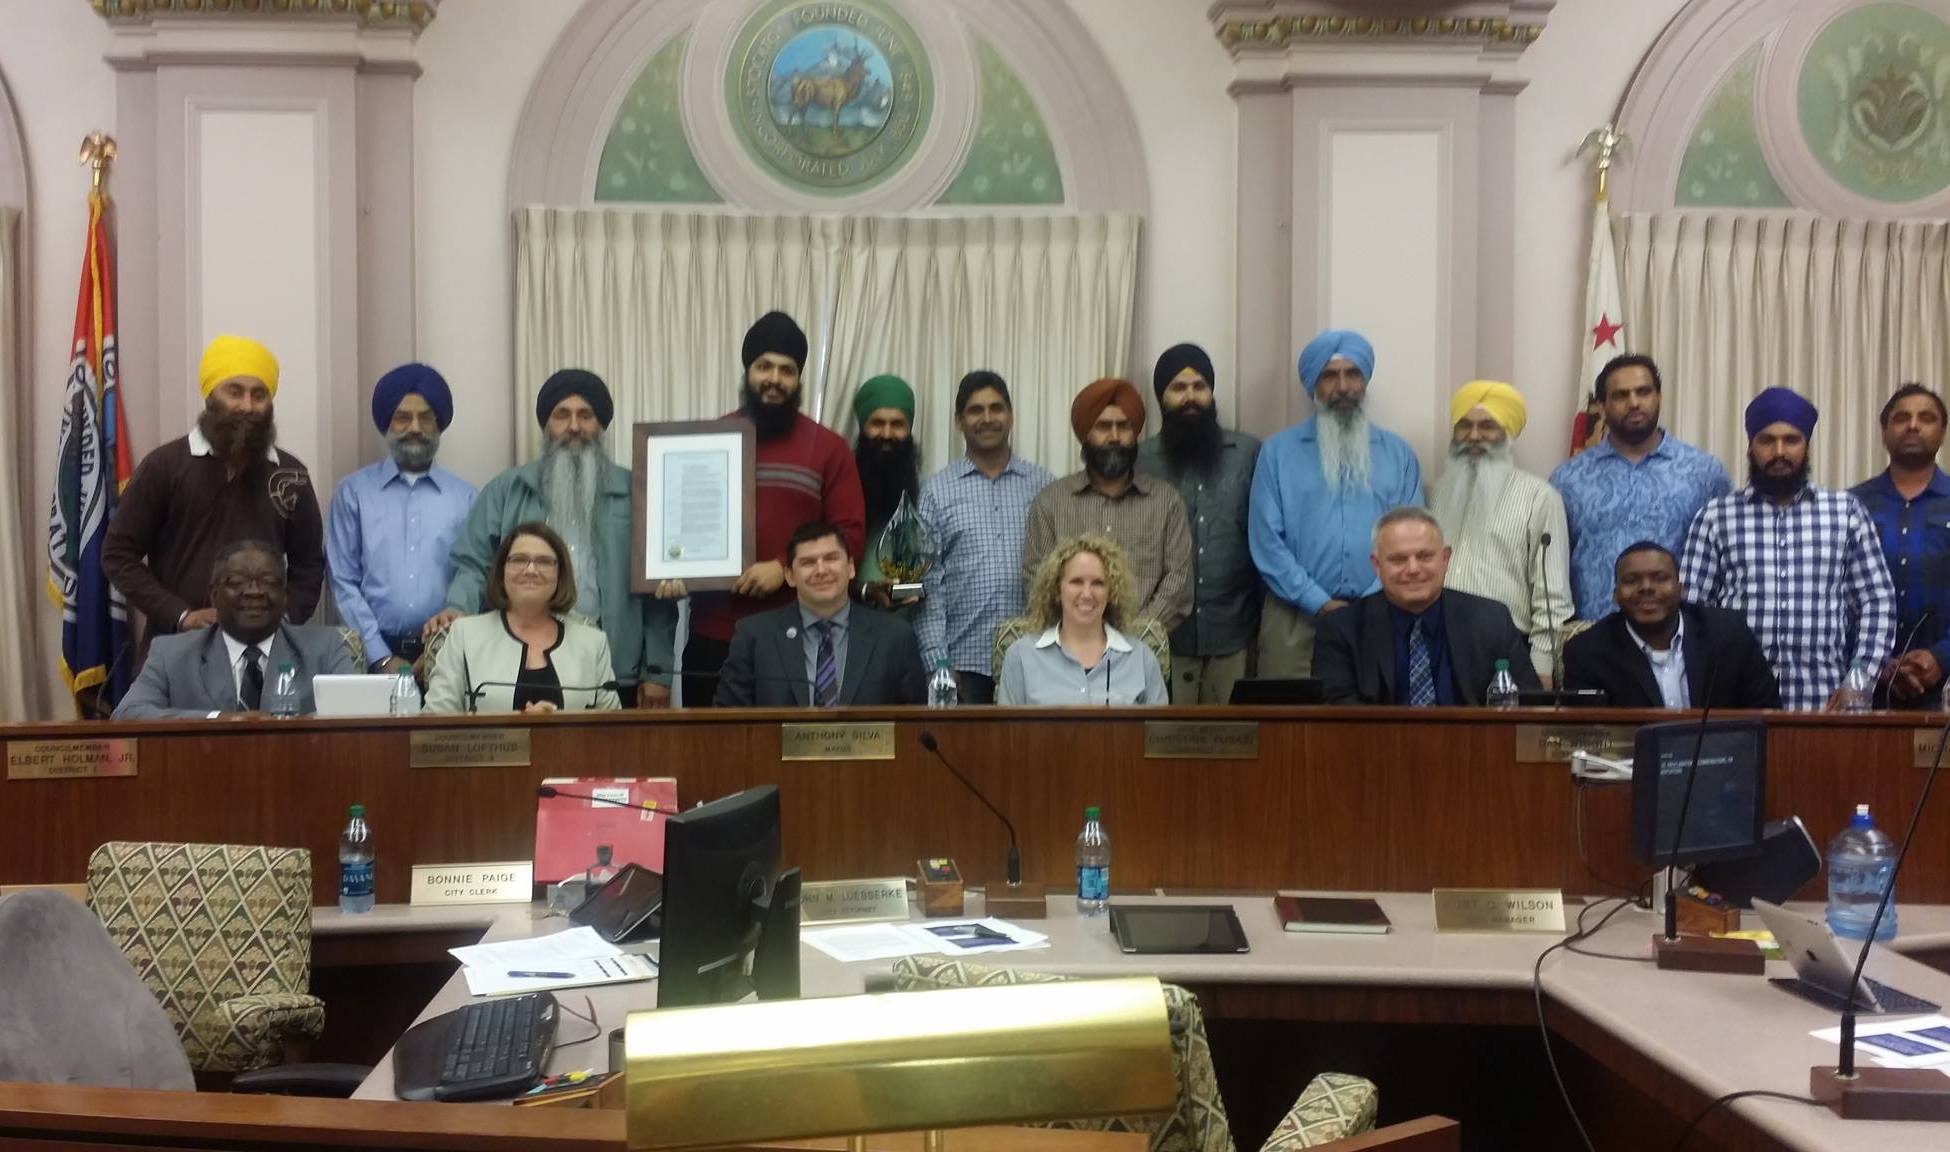 City of Stockton Proclamation Recognizes “Ongoing Impact” of 1984 Sikh Genocide on Indian Minorities